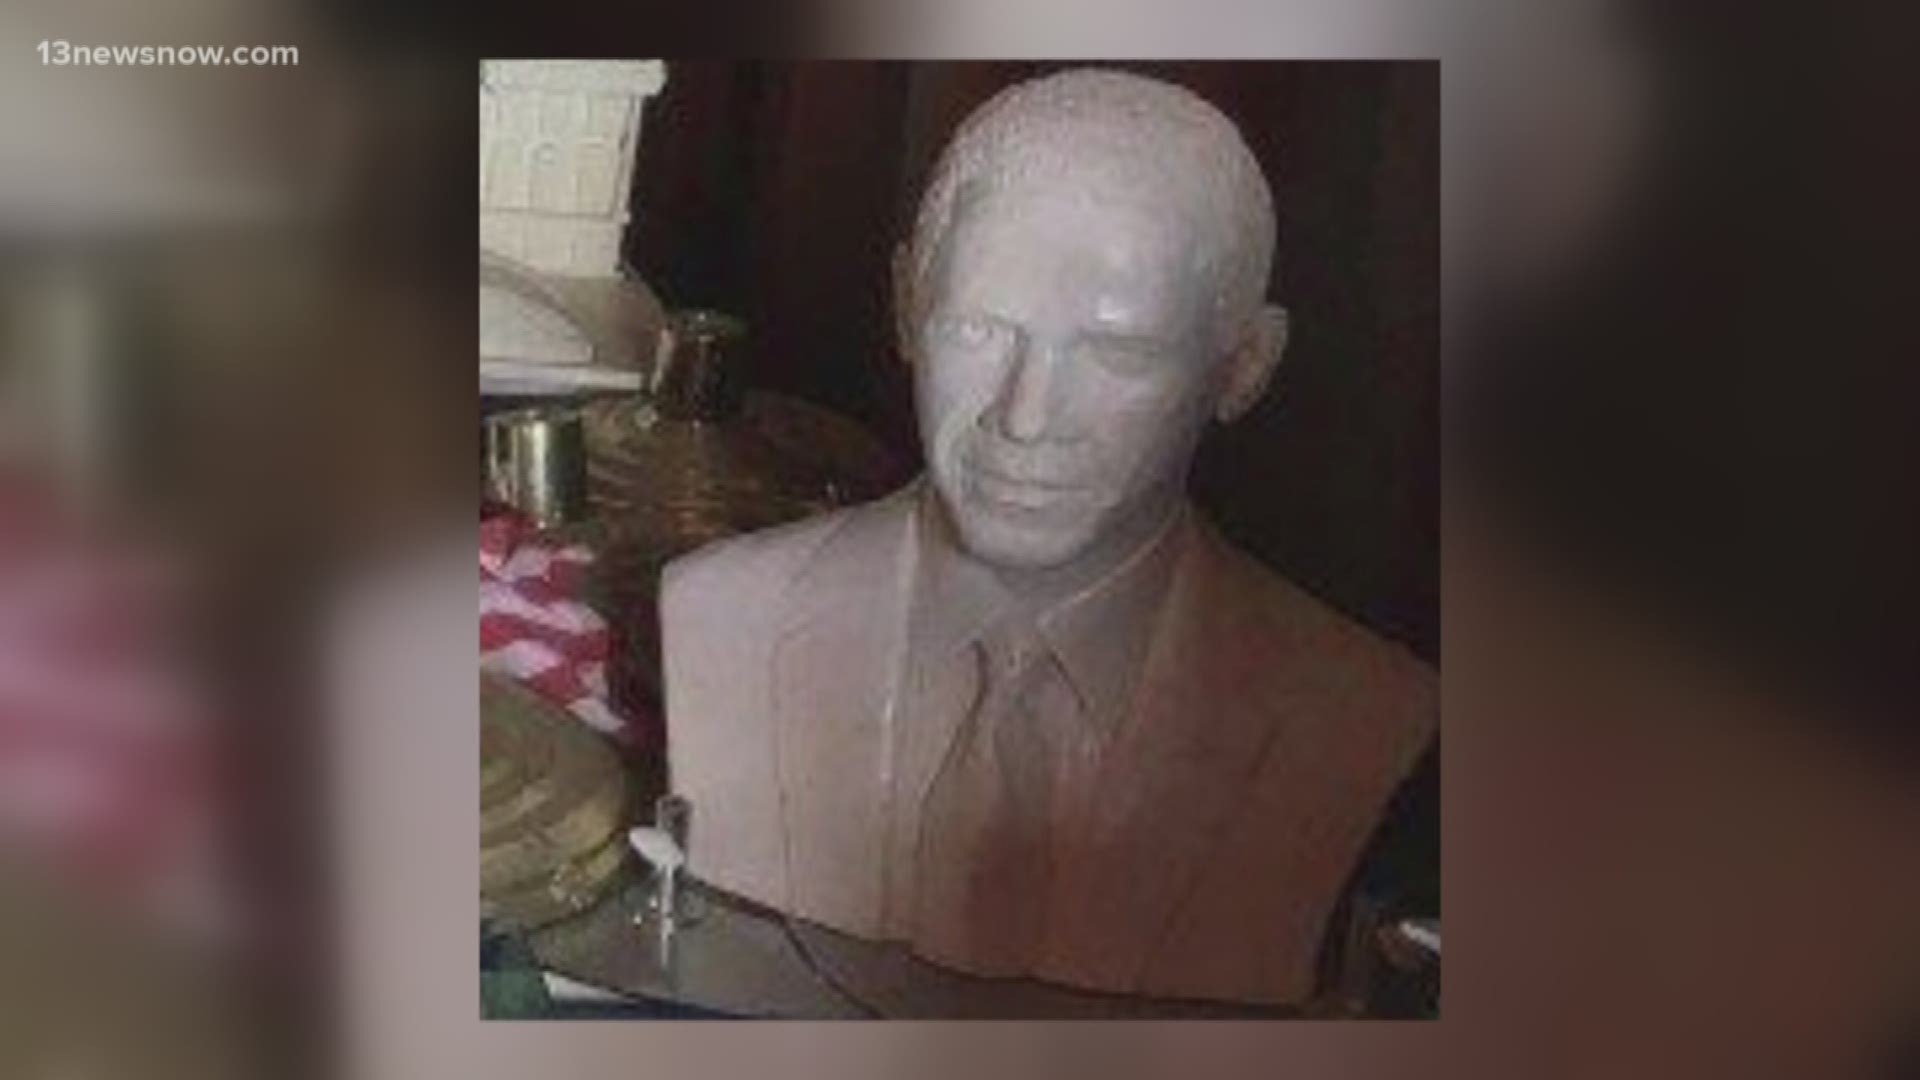 The giant busts from Presidents Park are kept at a farm in Williamsburg. There was a smaller bust of Barack Obama that was stolen.